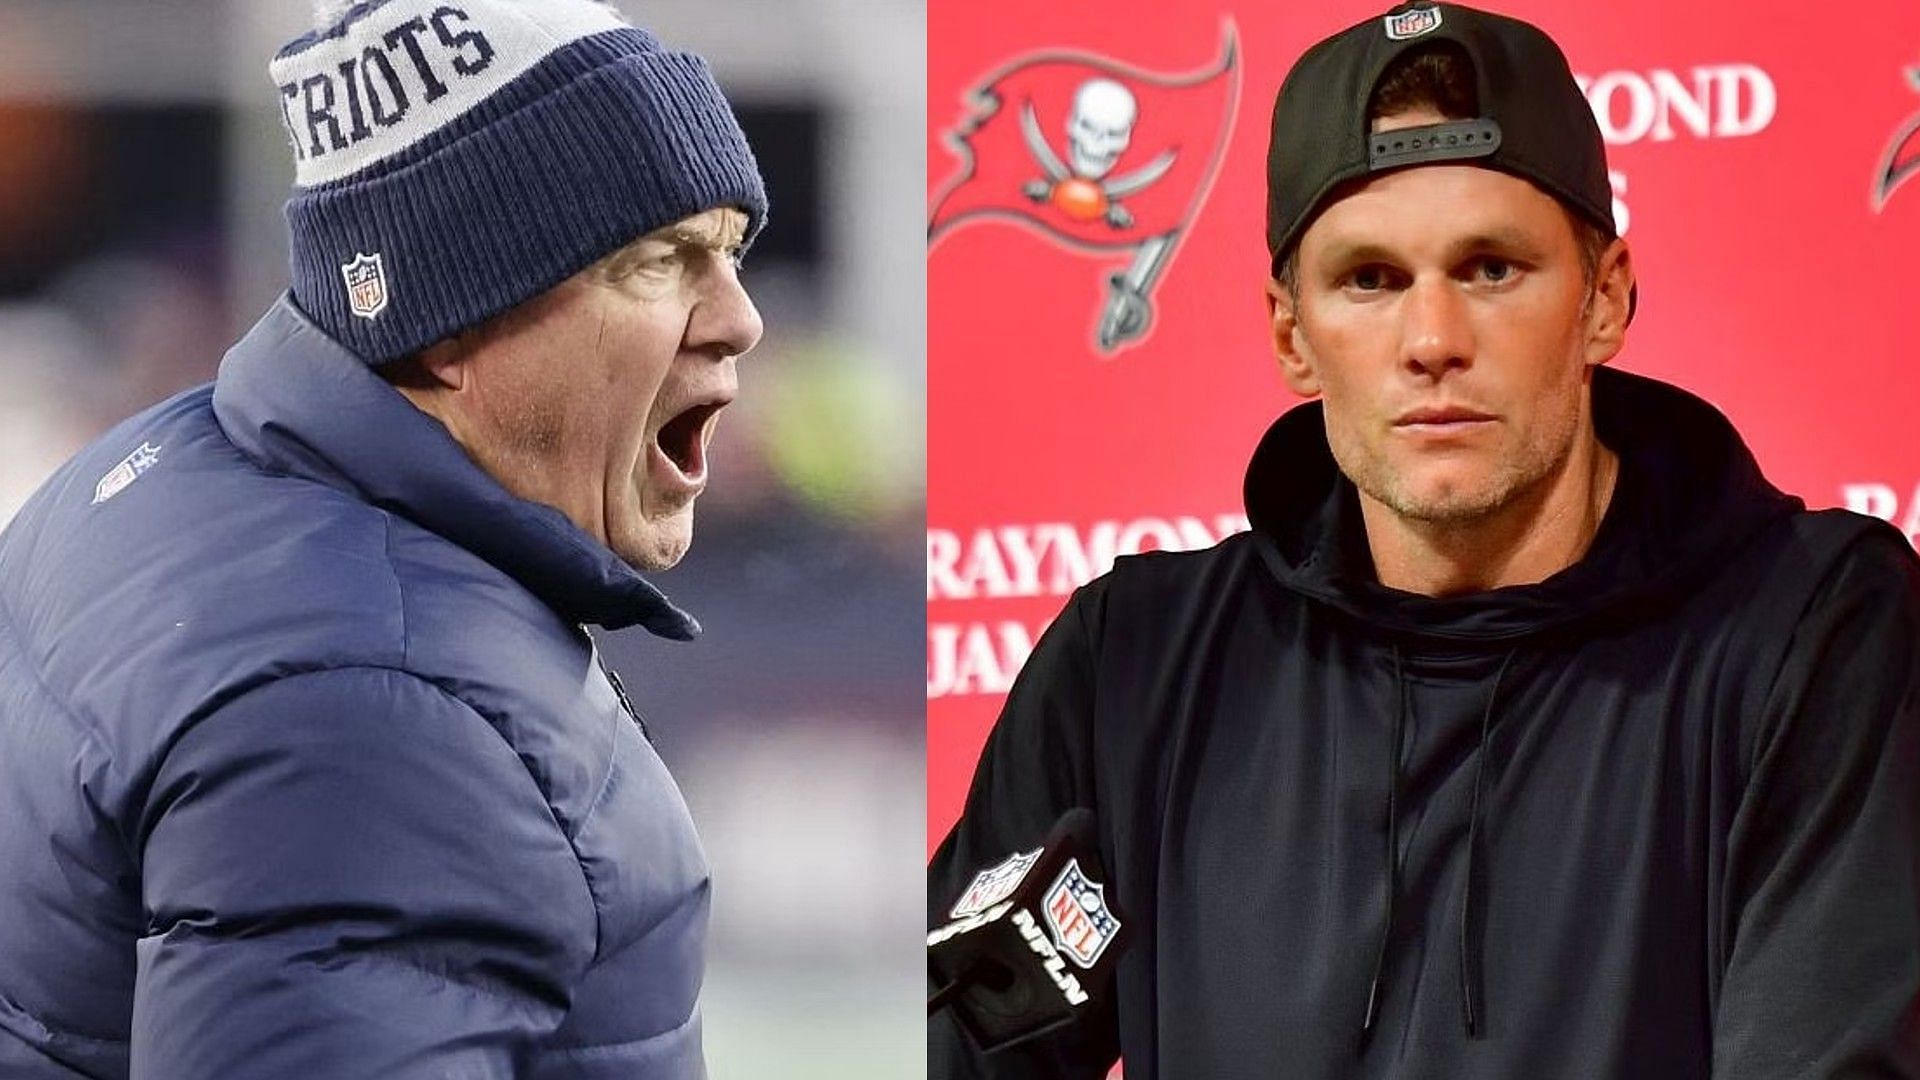 Tom Brady got torched by Bill Belichick, former teammate claims